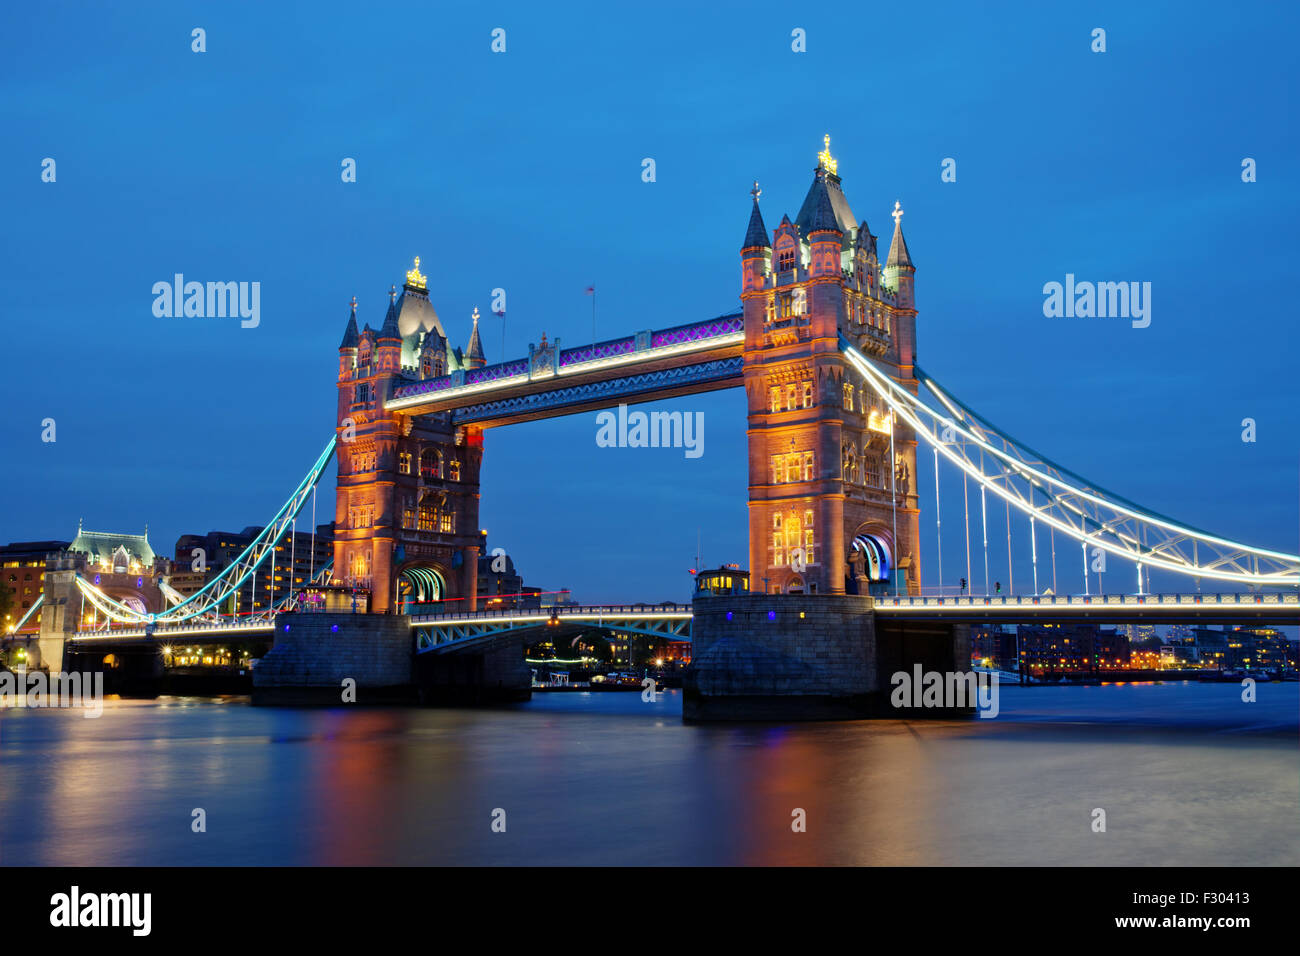 The famous Tower Bridge in London after sunset Stock Photo